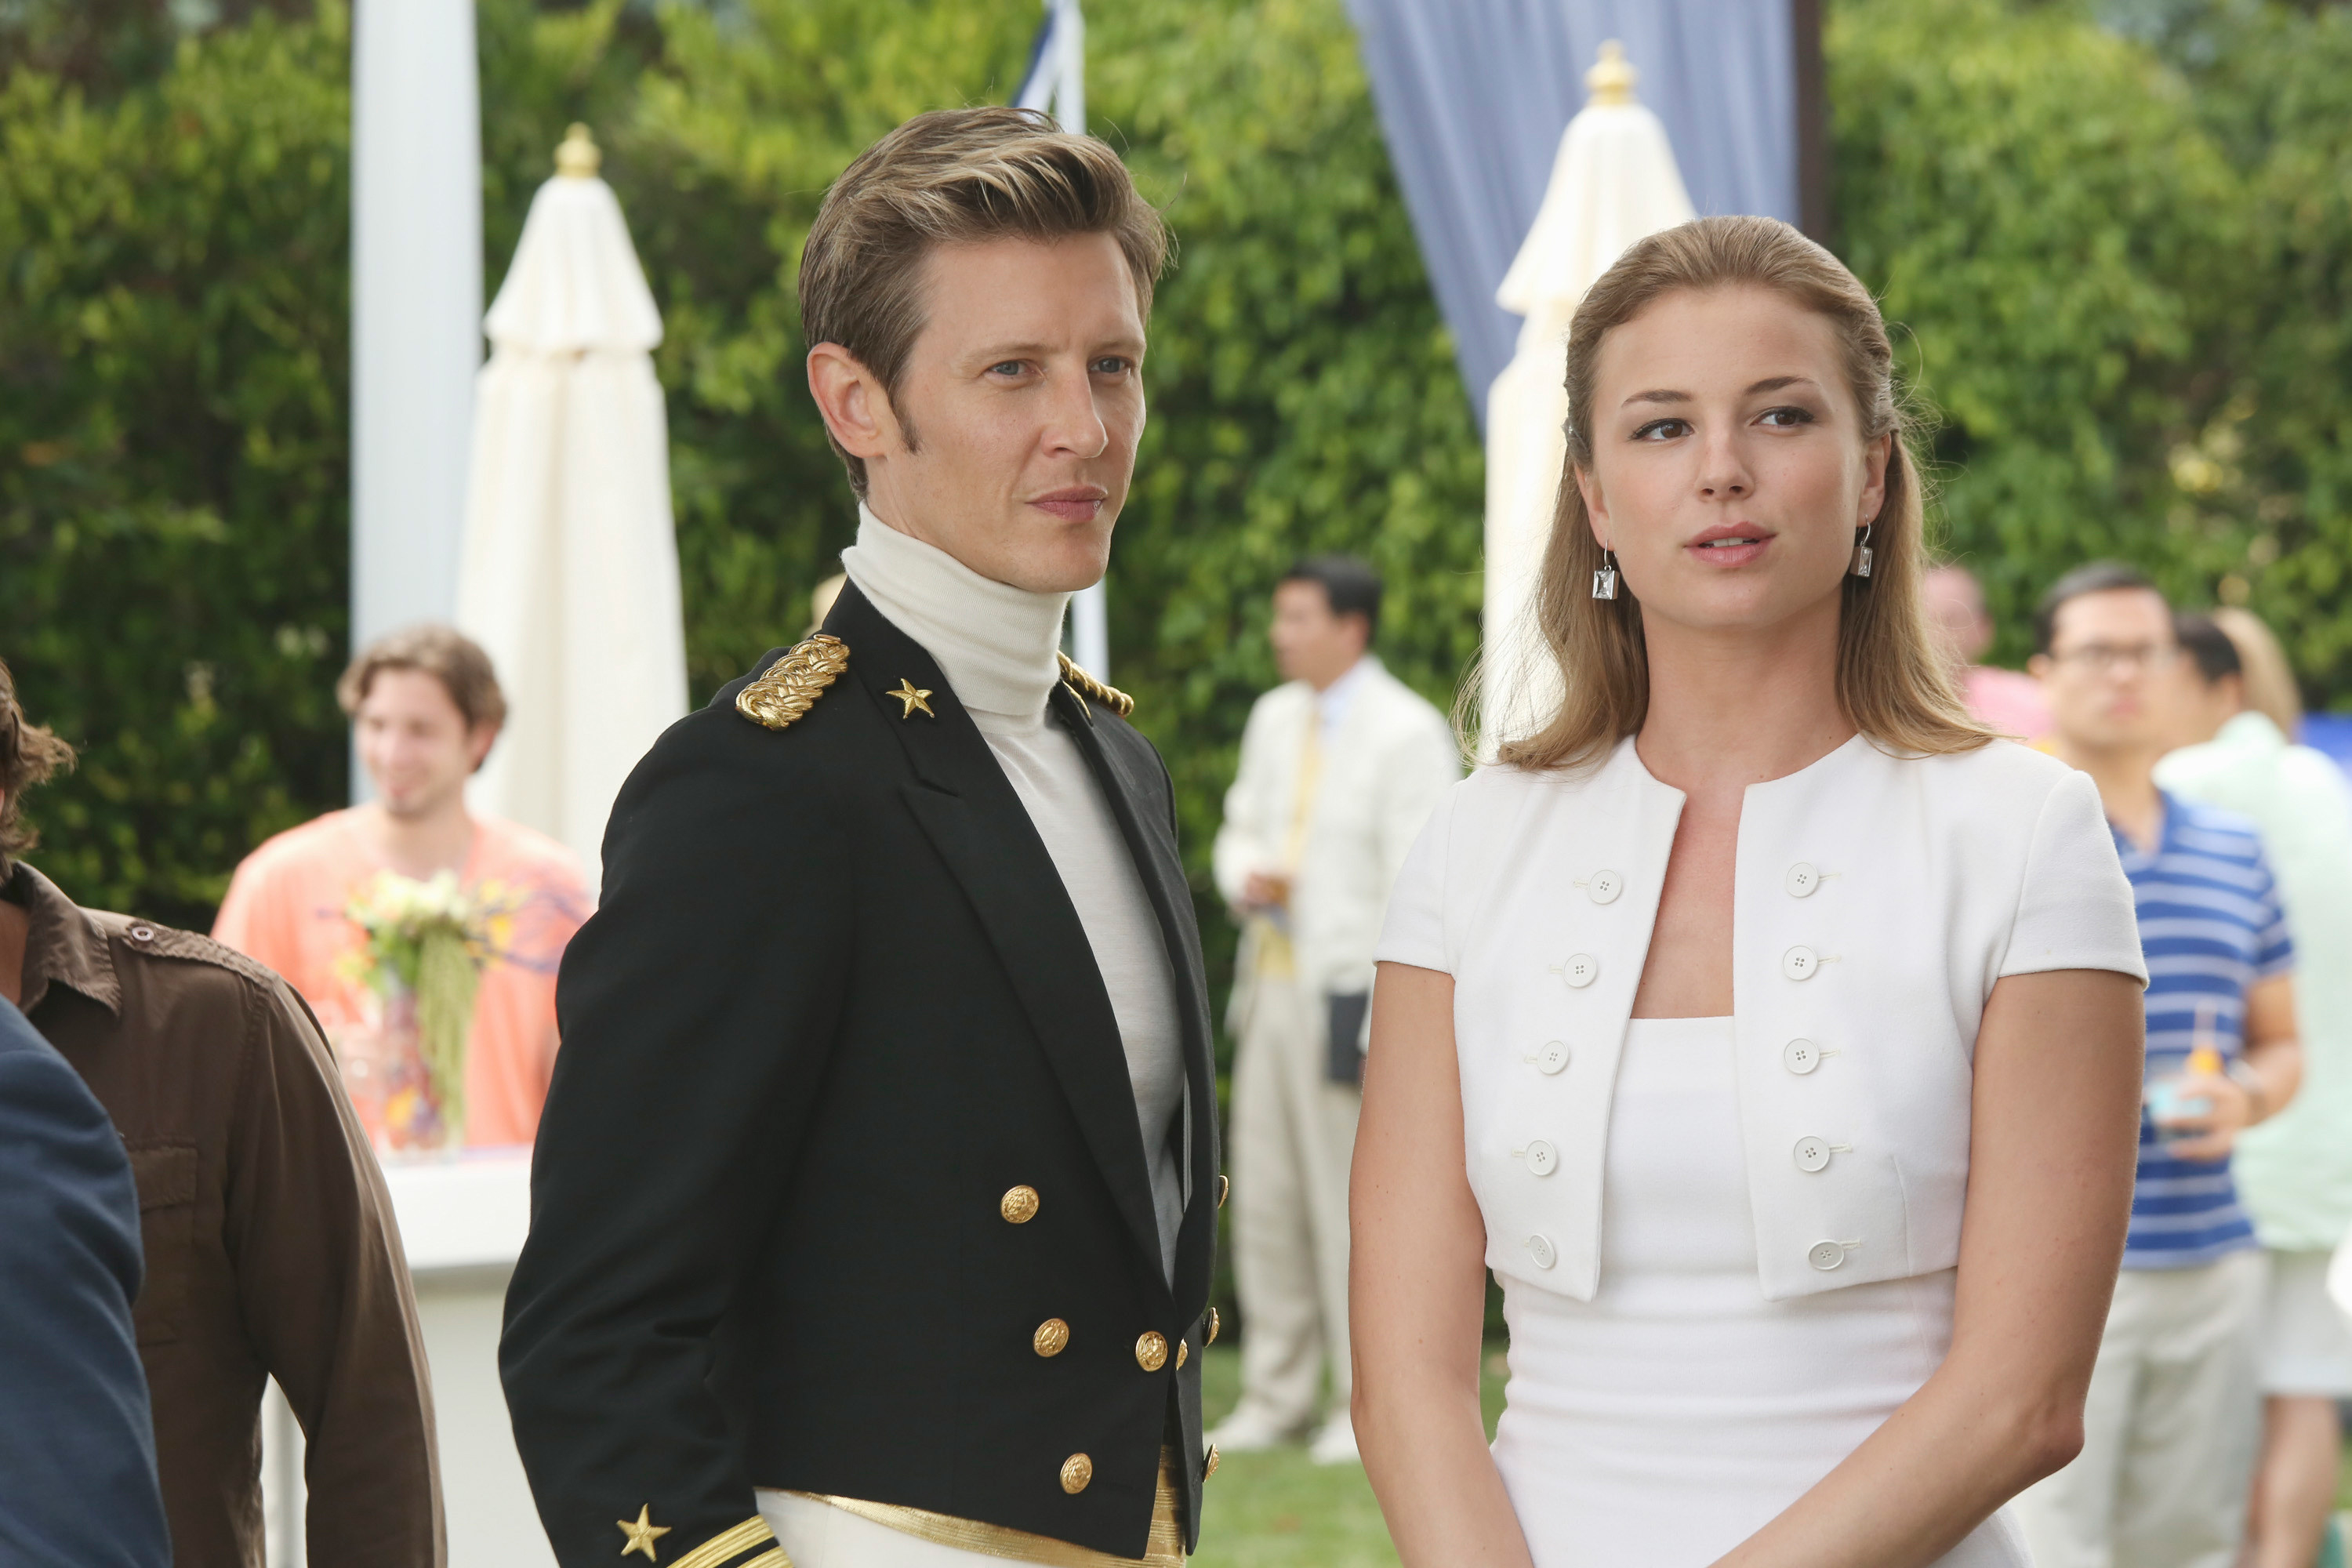 Emily VanCamp and Gabriel Mann stand outside at a party in the TV show Revenge.